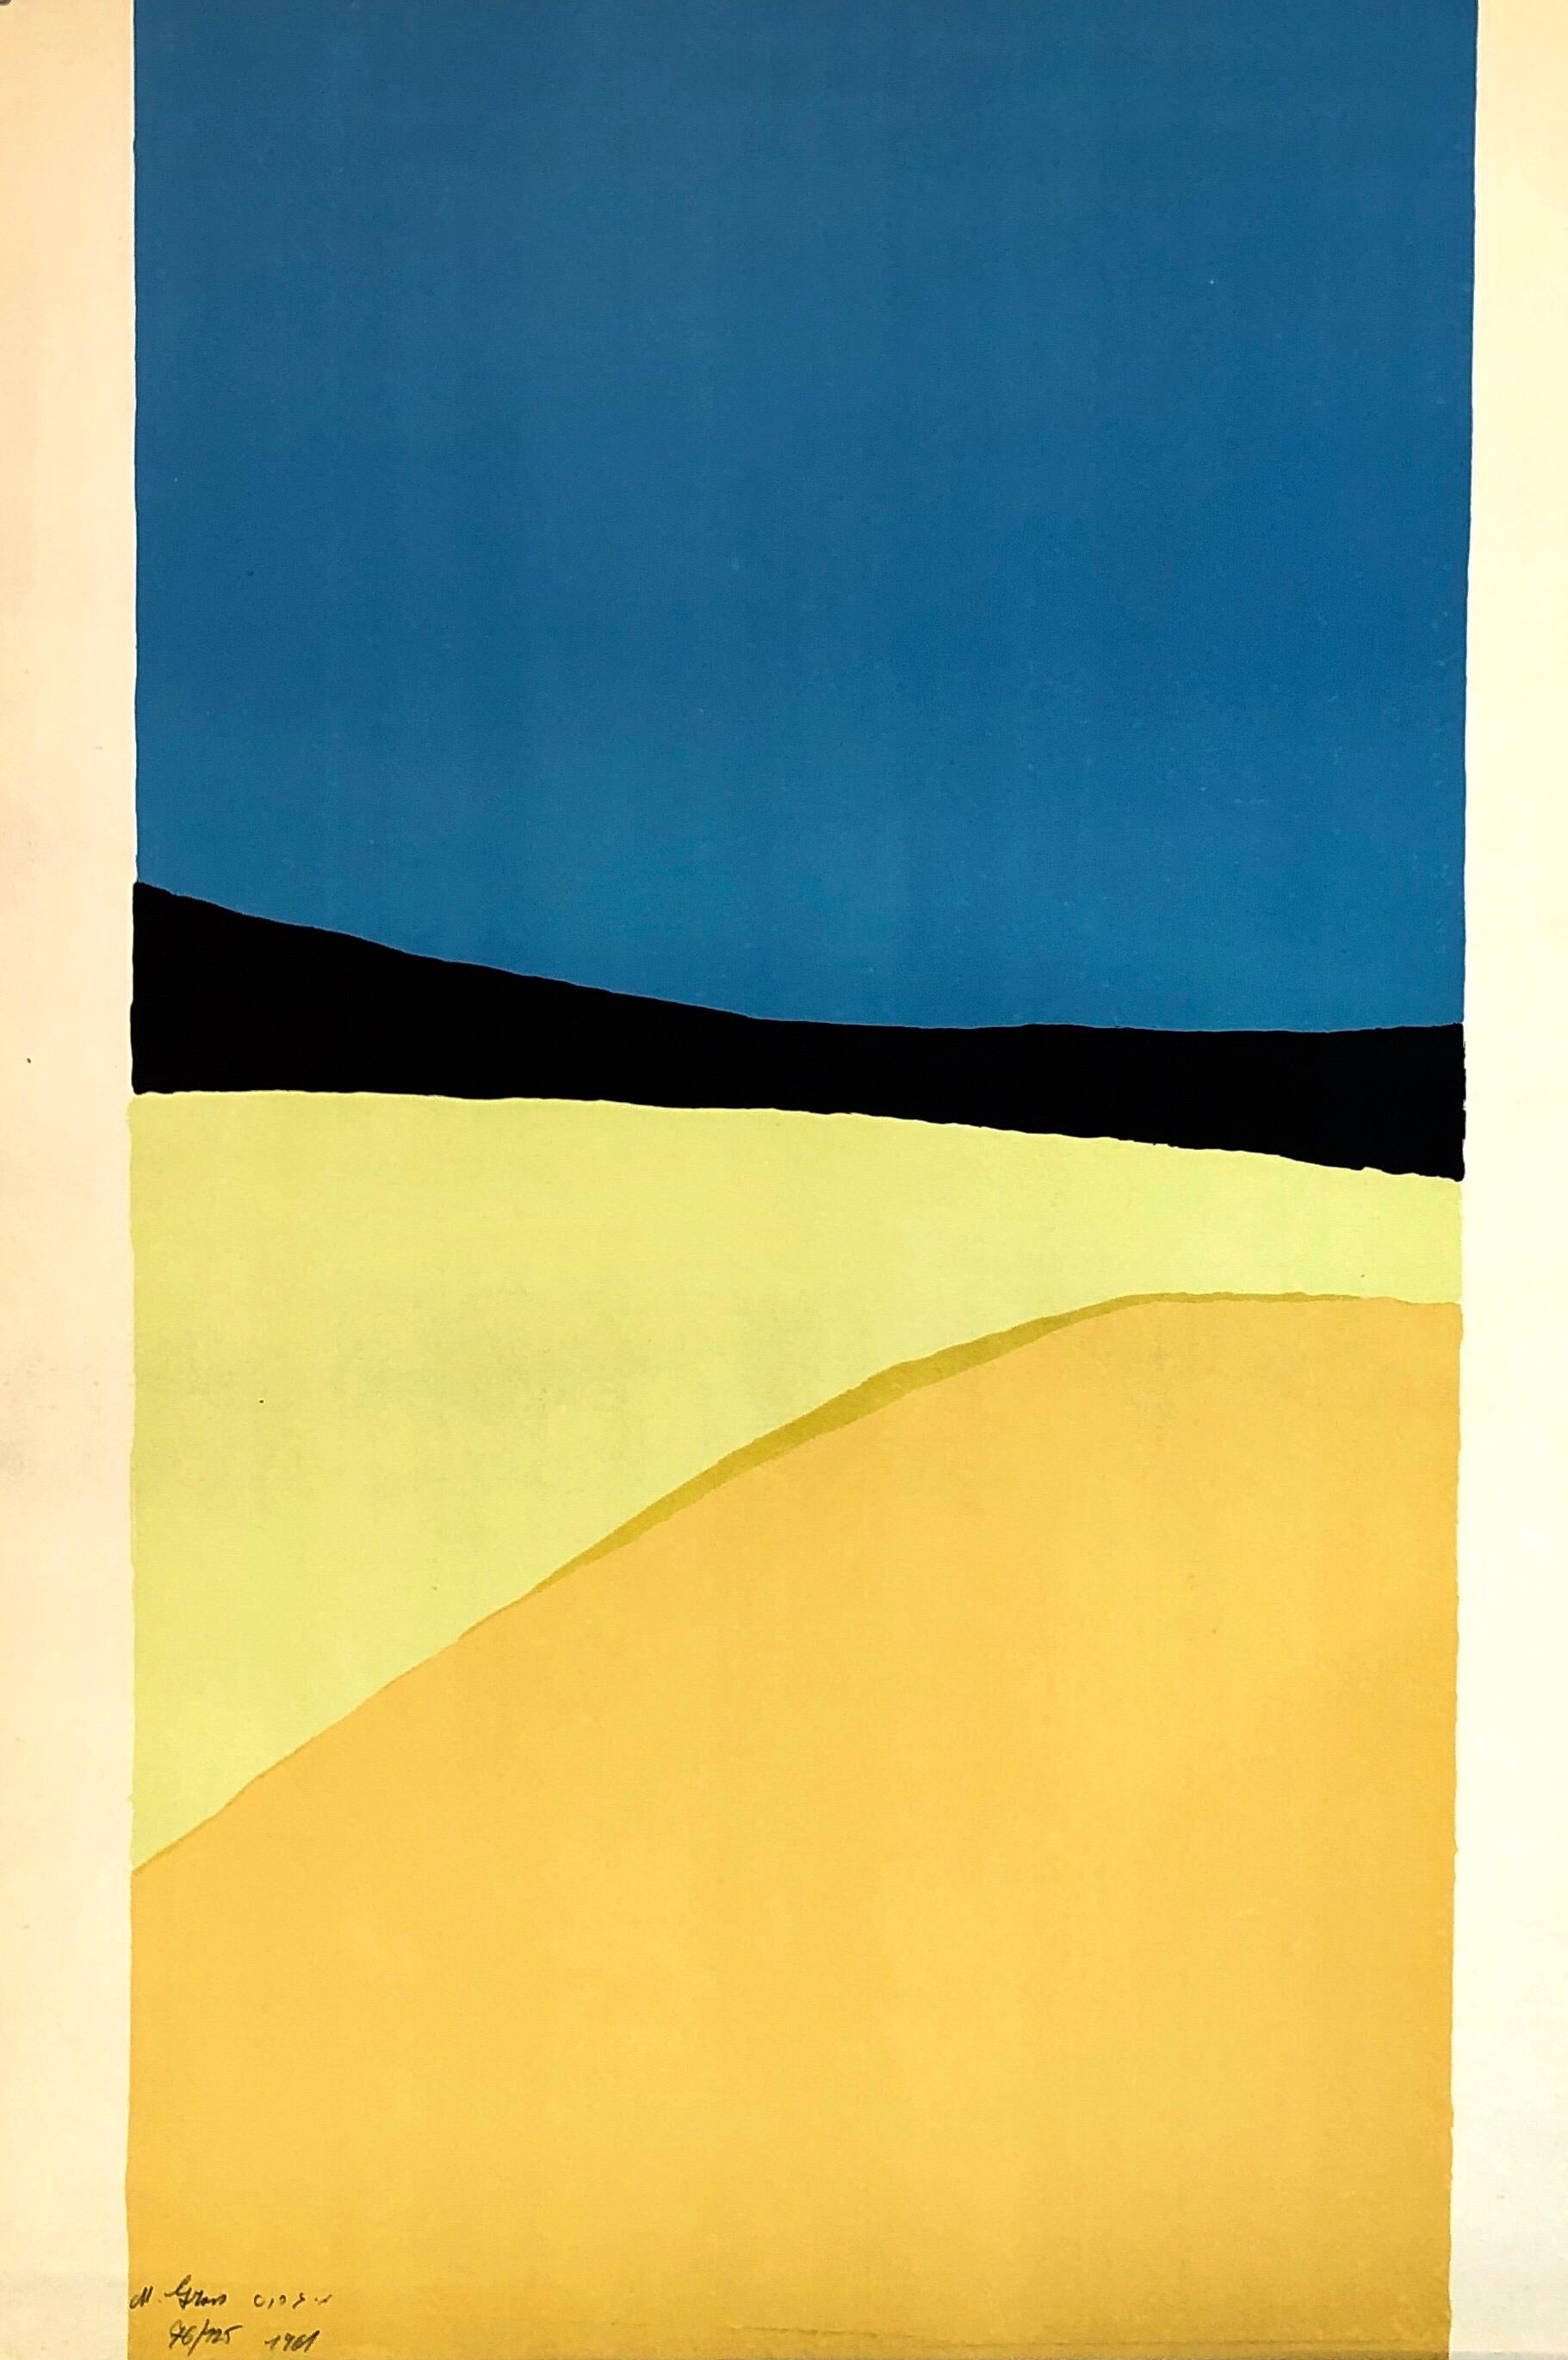 Abstract Composition, 1959 Silkscreen Lithograph "Landscape with Sea".
This was from a portfolio which included works by Yosl Bergner, Menashe Kadishman, Yosef Zaritsky, Aharon Kahana, Jacob Wexler, Moshe Tamir and Michael Gross.

Michael Gross